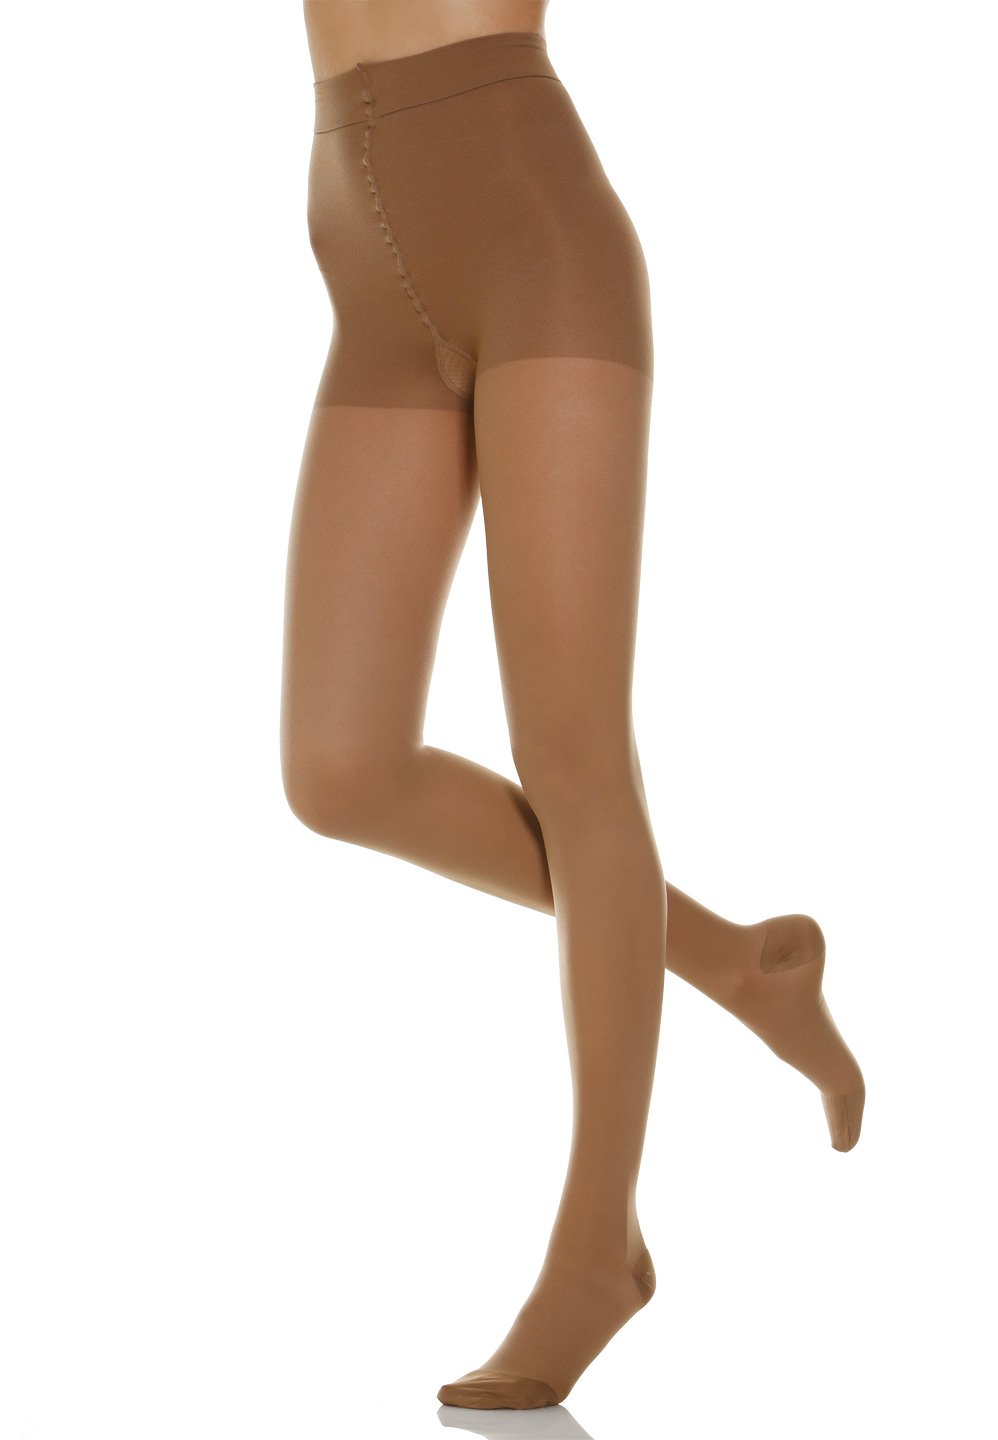 Support Tights Compression Stockings 140DEN Plus Size 22-27mmHg